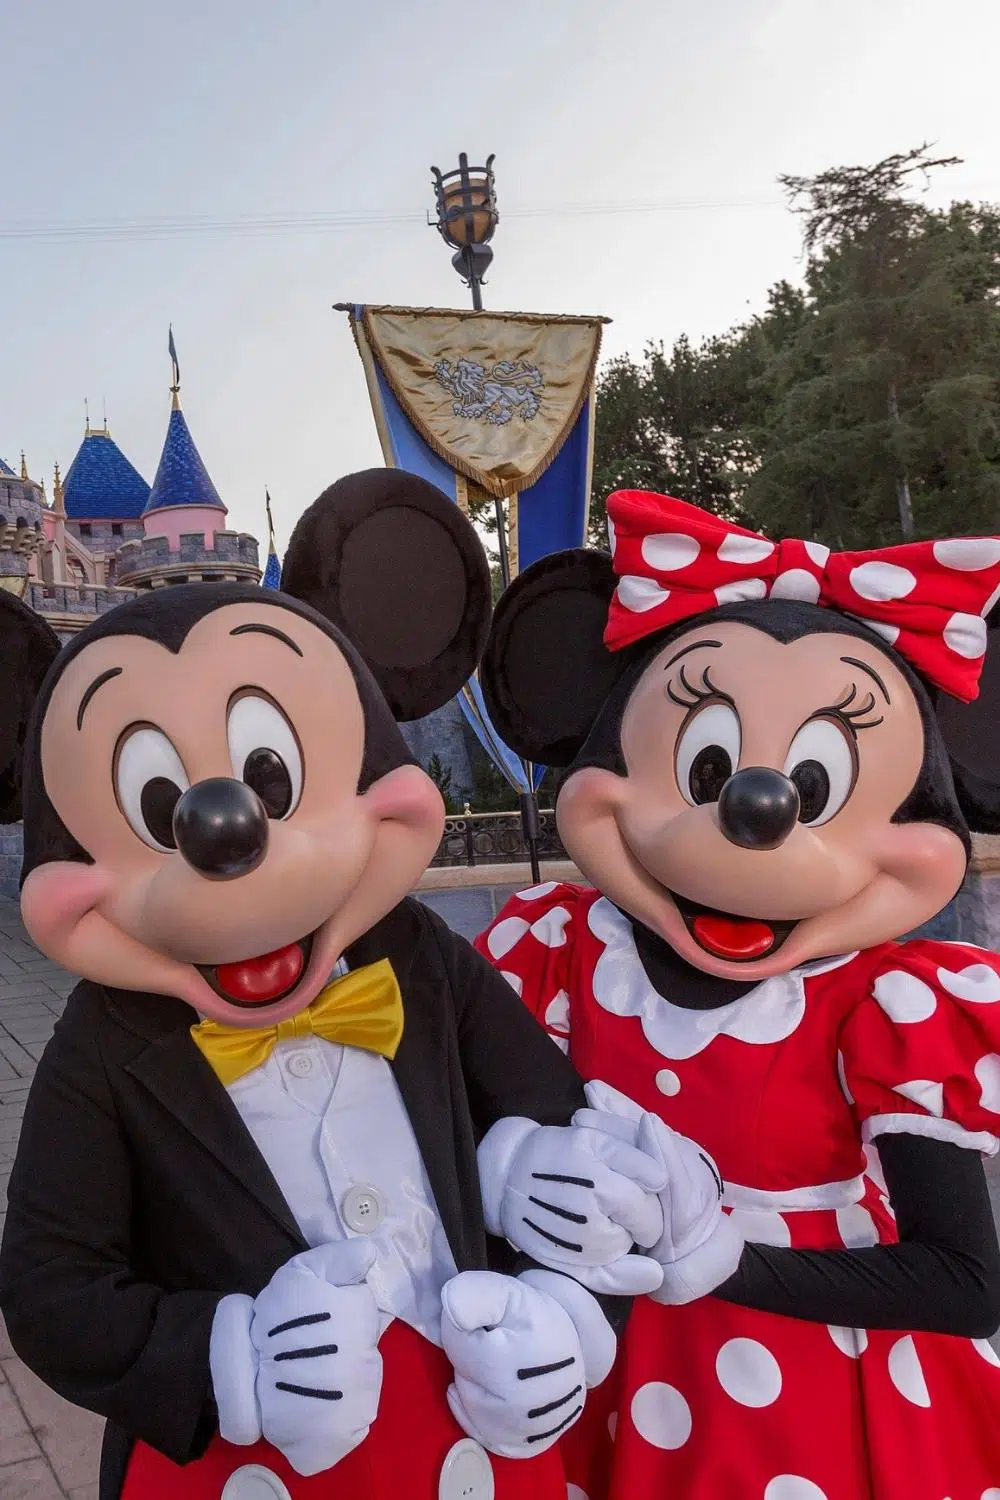 Closeup photo of Mickey and Minnie linking arms in front of Sleeping Beauty's castle at Disneyland.